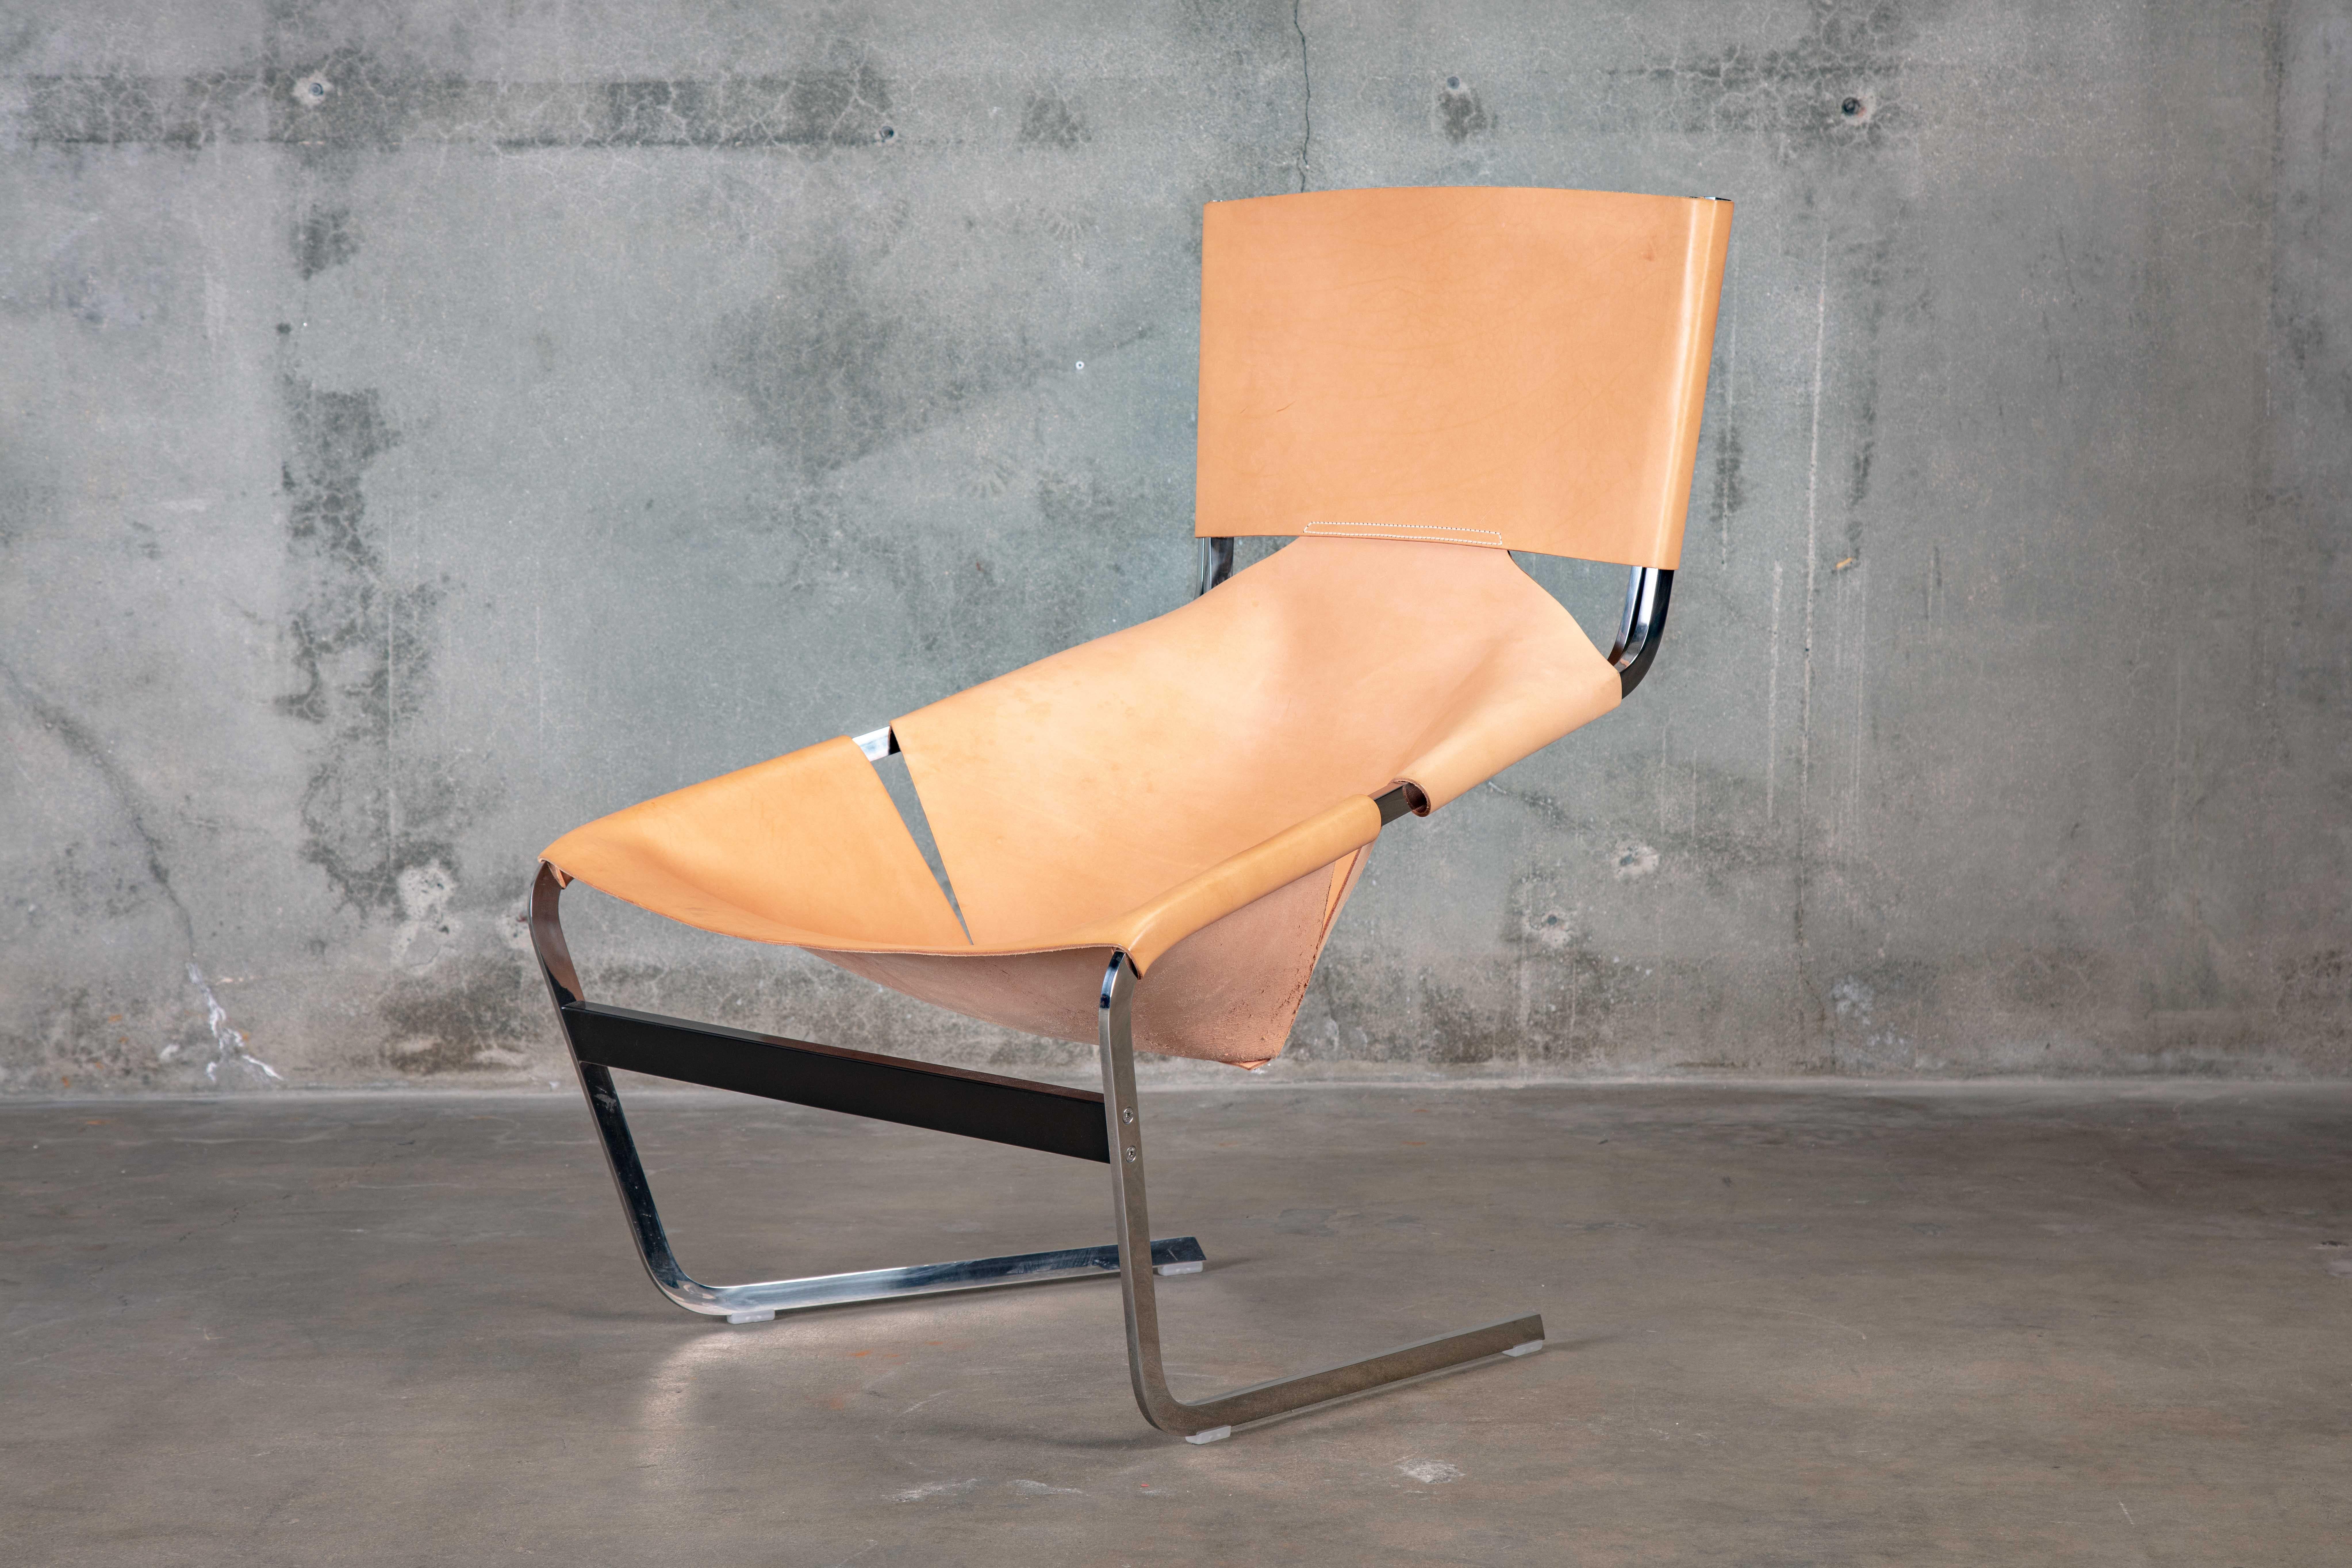 Pierre Paulin (1927-2009) for Artiford #F-444 lounge chair
Netherlands, 1990s.

Sea height: 13.5 inches.